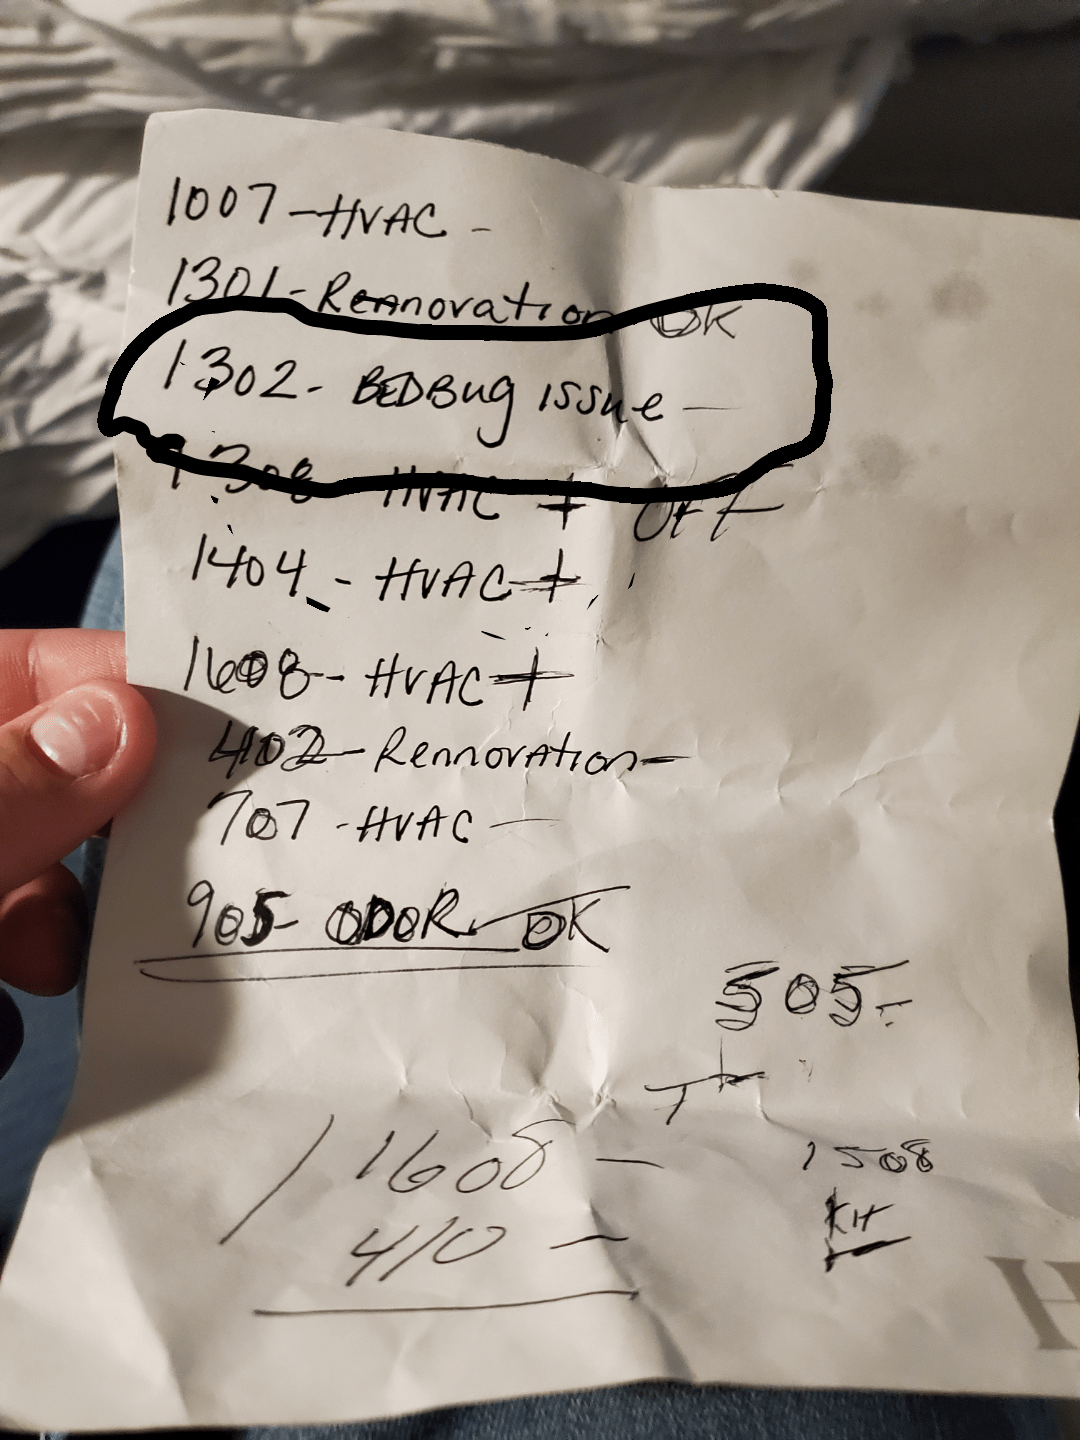 Handwritten note with various scribbles and circled text, likely a task or troubleshooting list related to HVAC issues